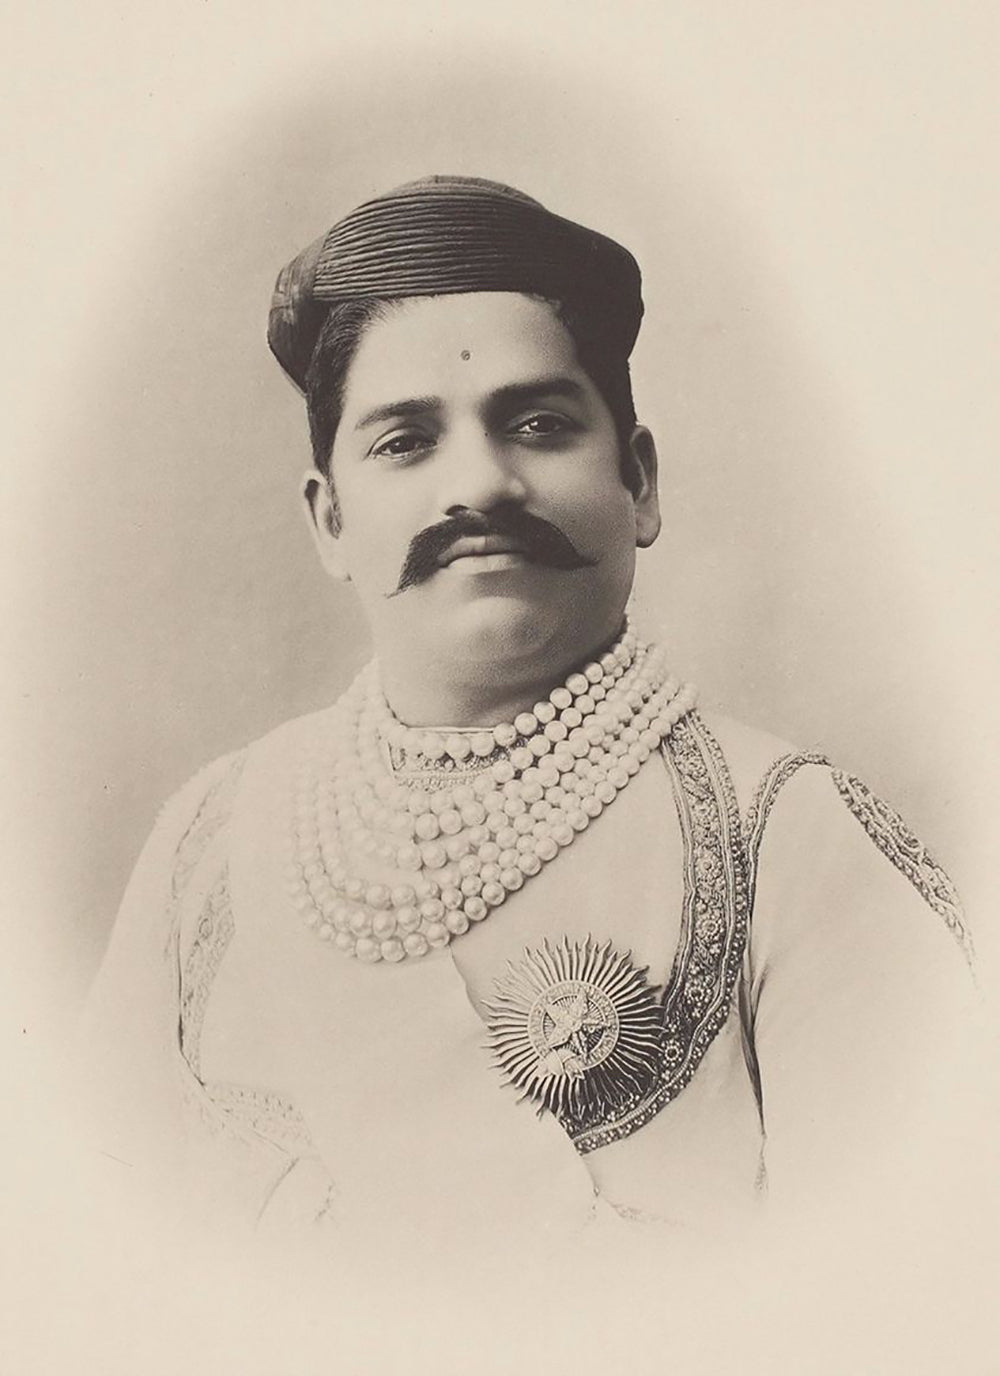 Top 10 Most Expensive Pearls in the World: Maharaja Wearing the Baroda Pearl Necklace